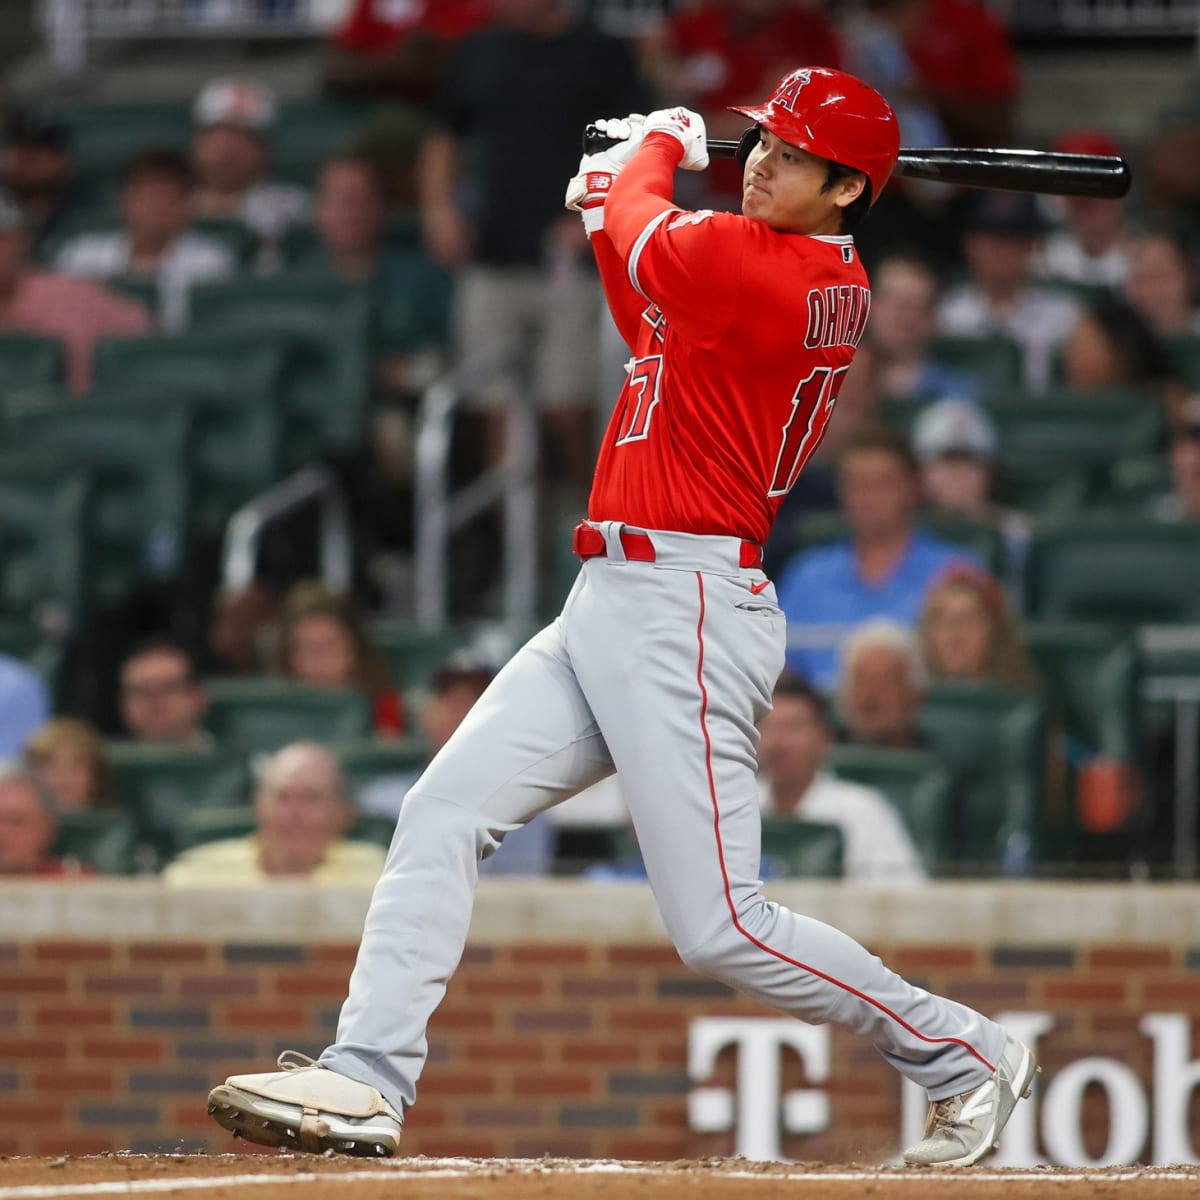 ESPN Stats & Info on X: Shohei Ohtani and Babe Ruth are the only